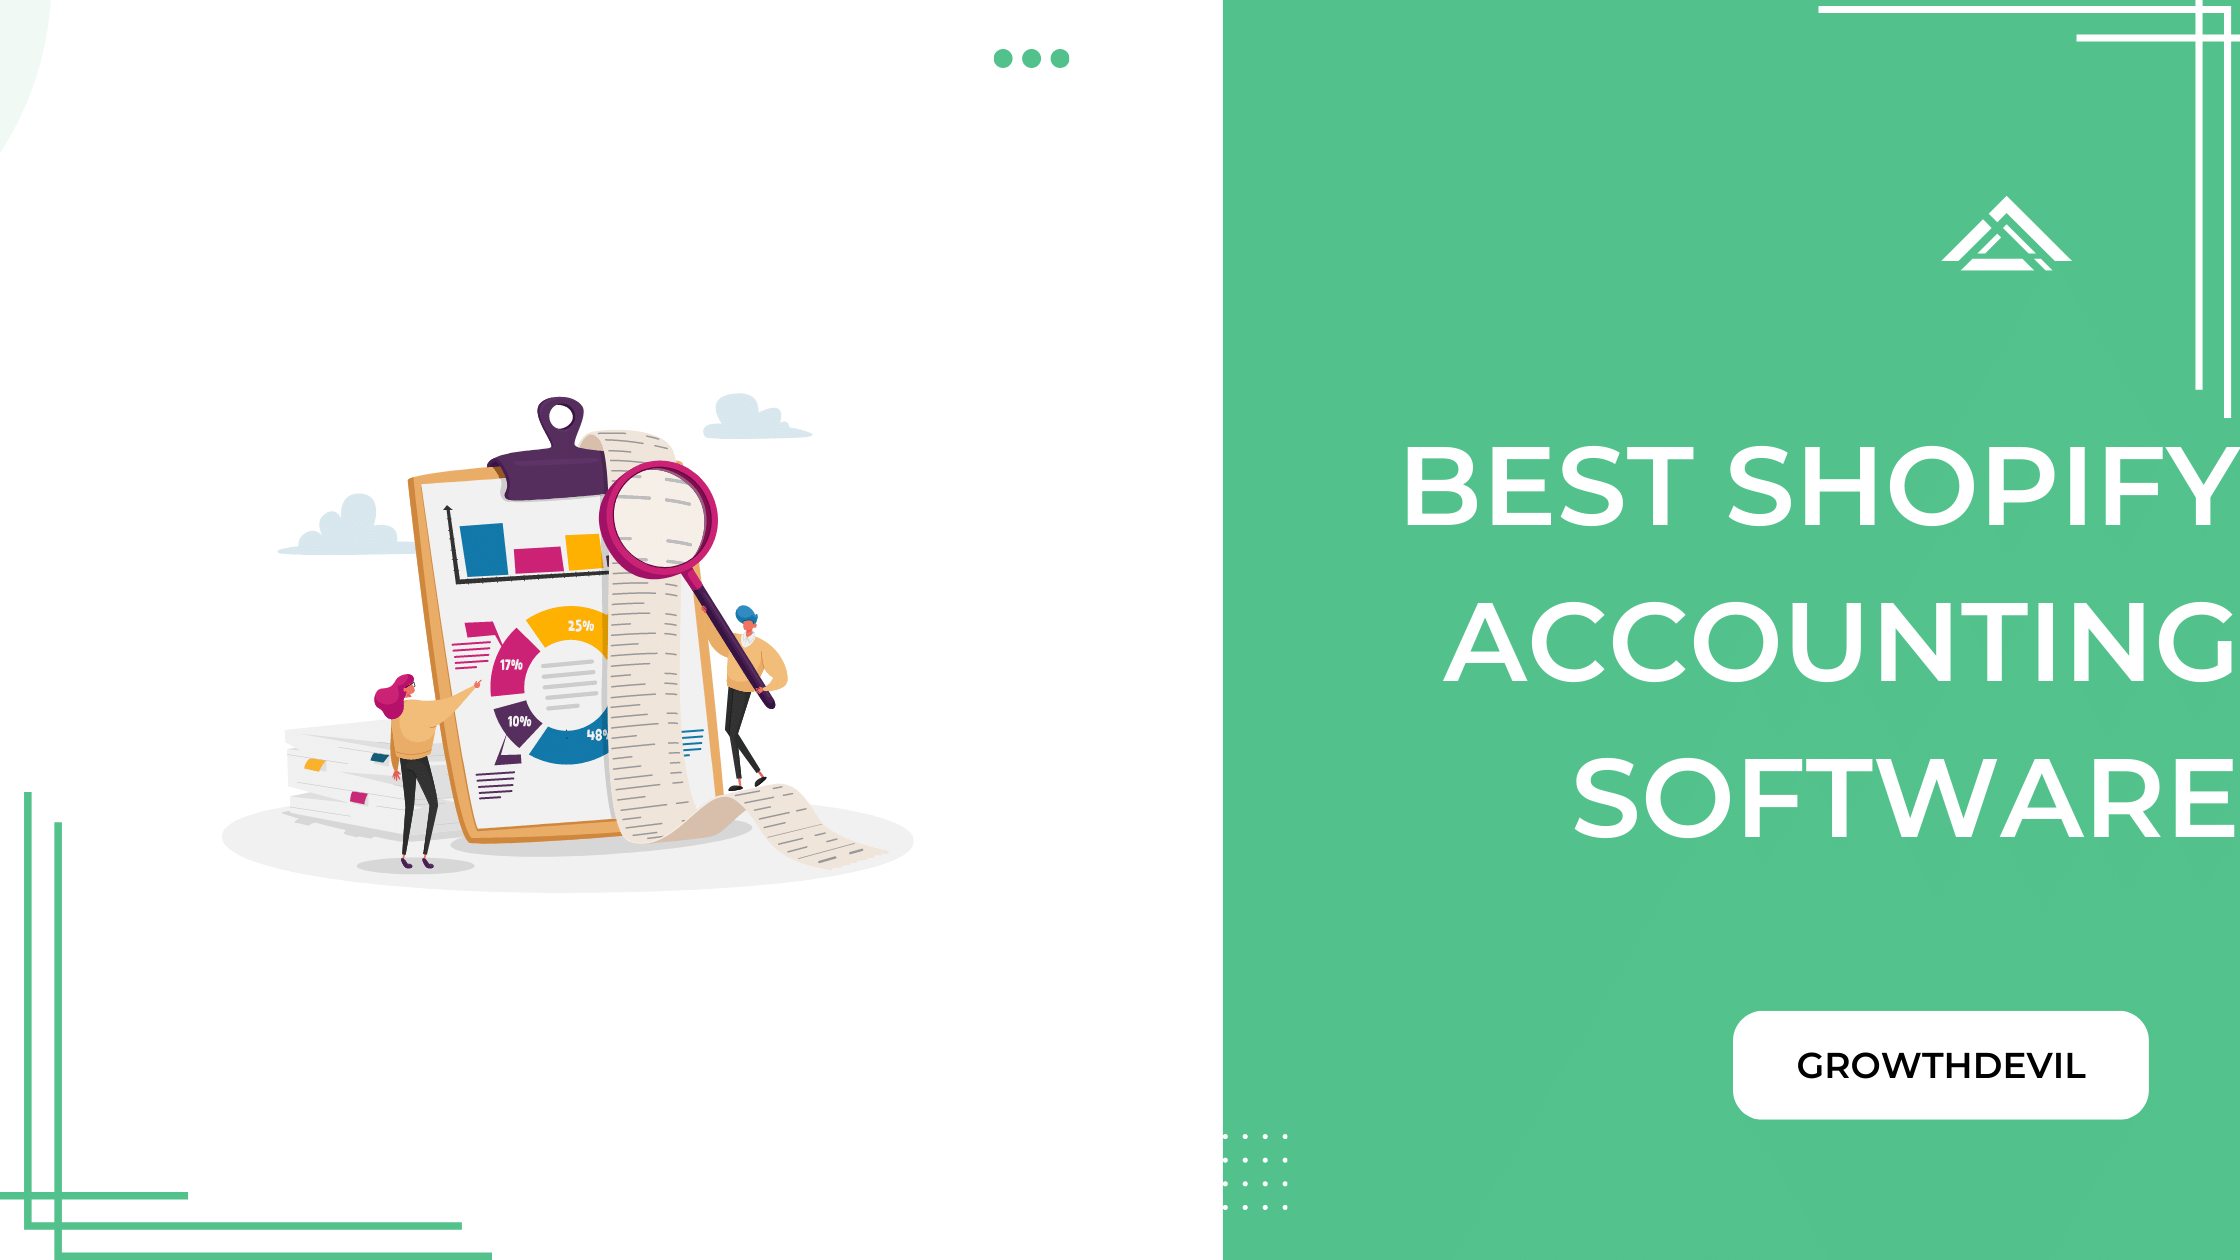 Best Shopify Accounting Software - GrowthDevil